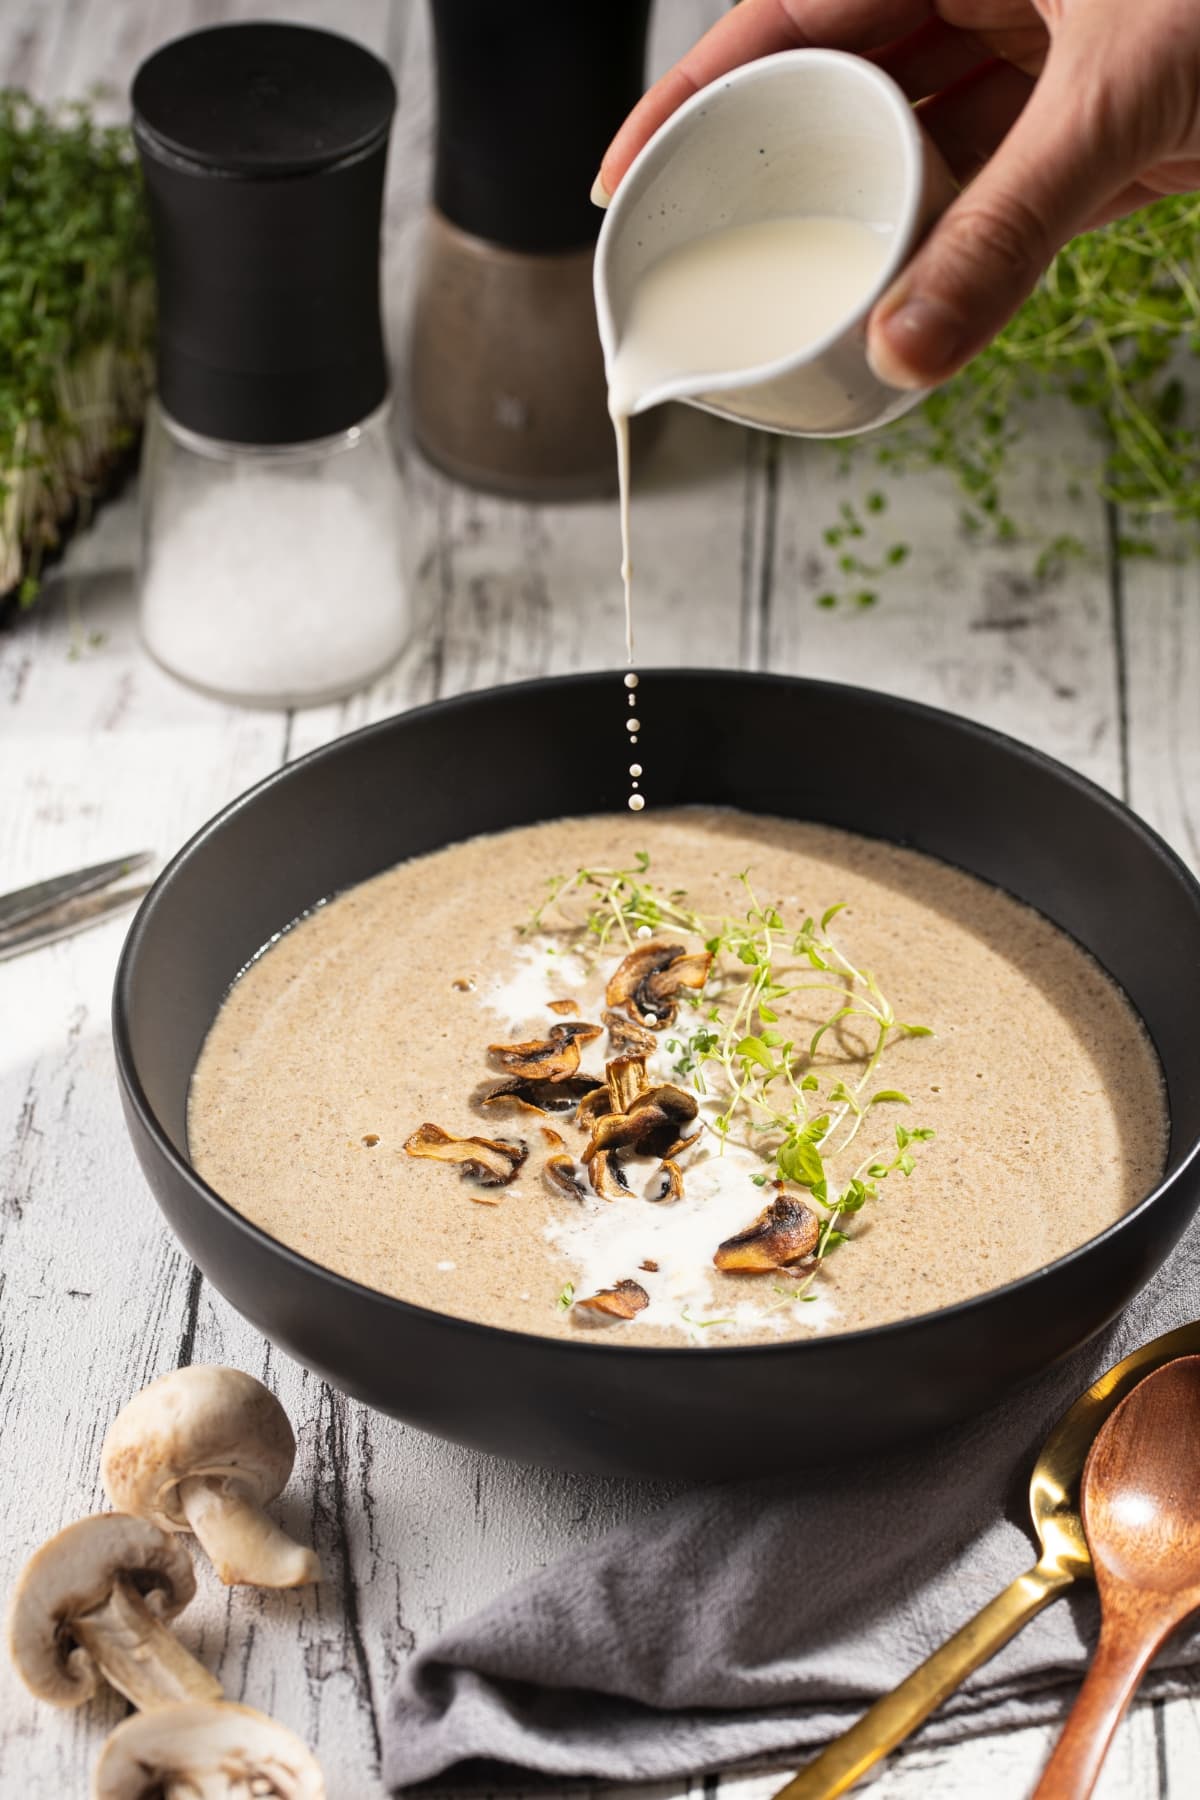 How to Thicken Soup (8 Easy Methods!) featuring Milk Poured into a Bowl of Mushroom Soup with Sauteed Mushrooms and Microgreens on a Wooden Table with More Mushrooms and a Gold Spoon Around the Bowl